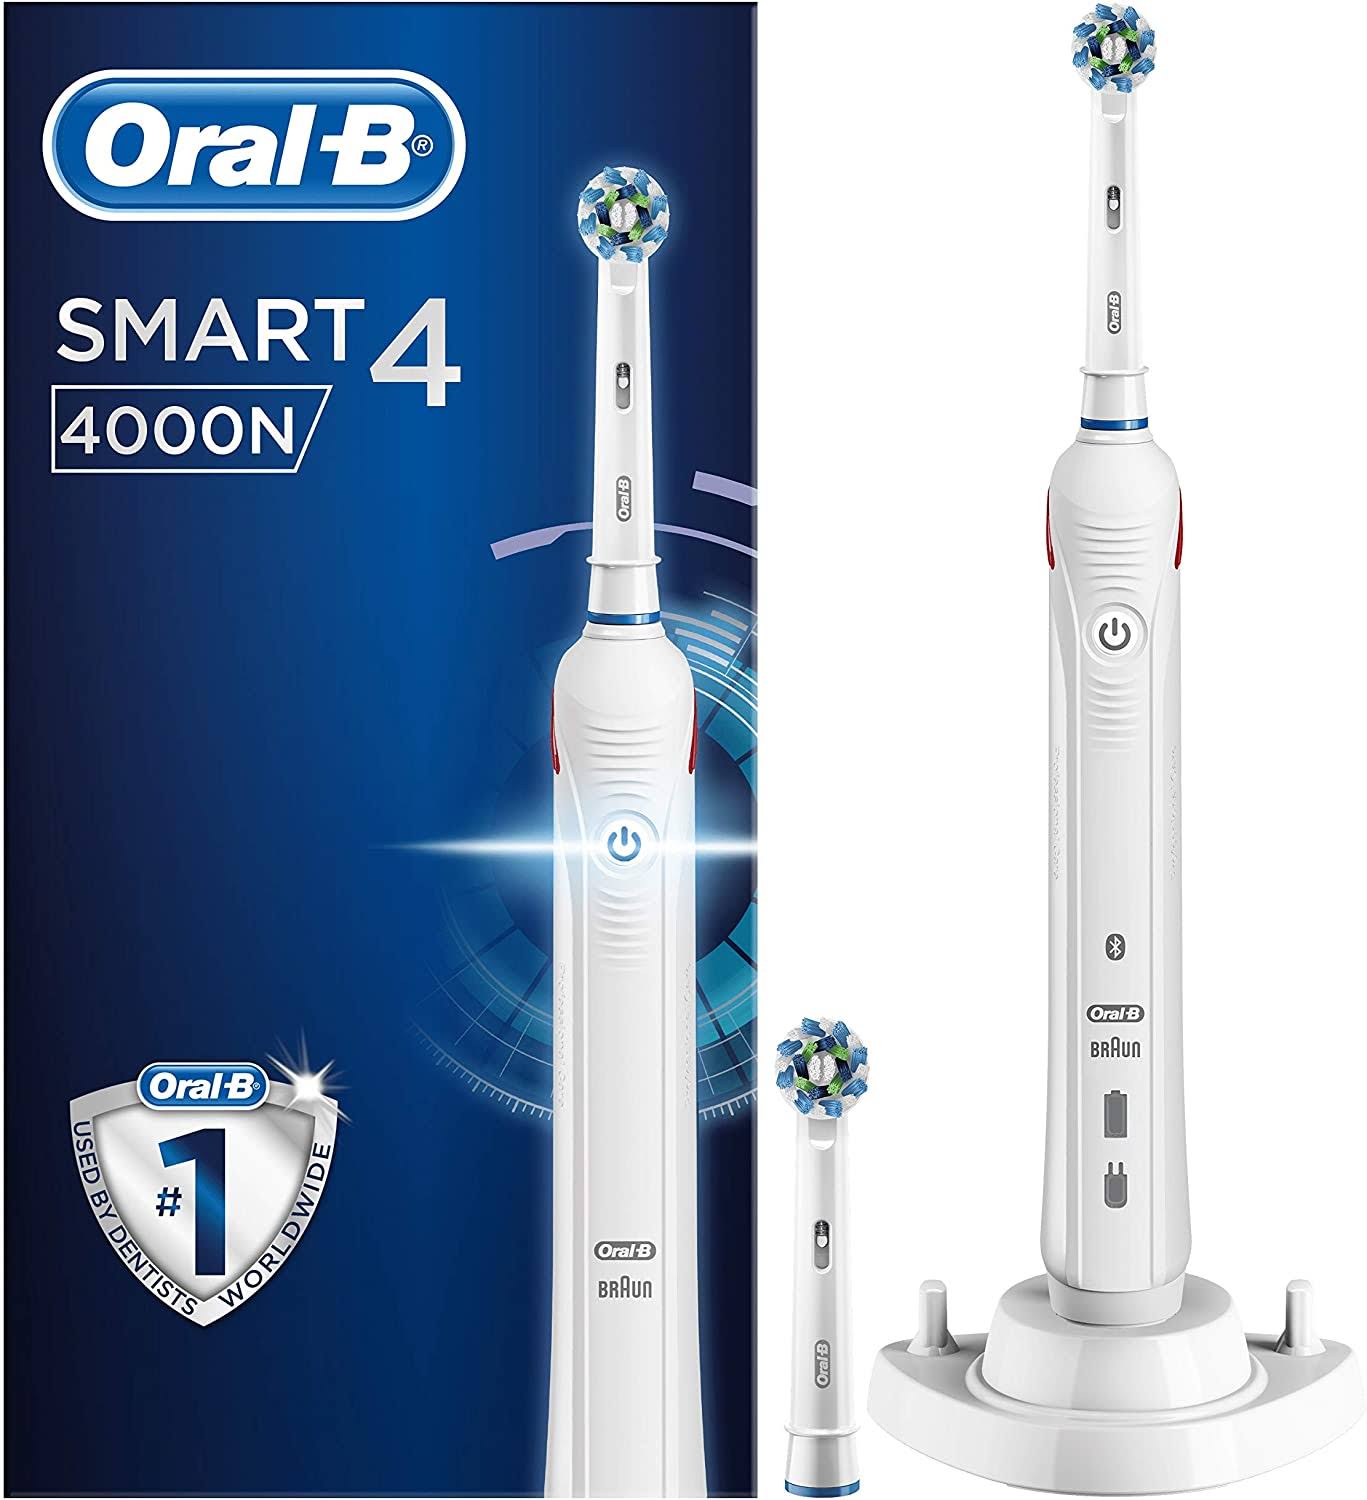 Oral-B Smart 4 4000n CrossAction Electric Toothbrush Rechargeable